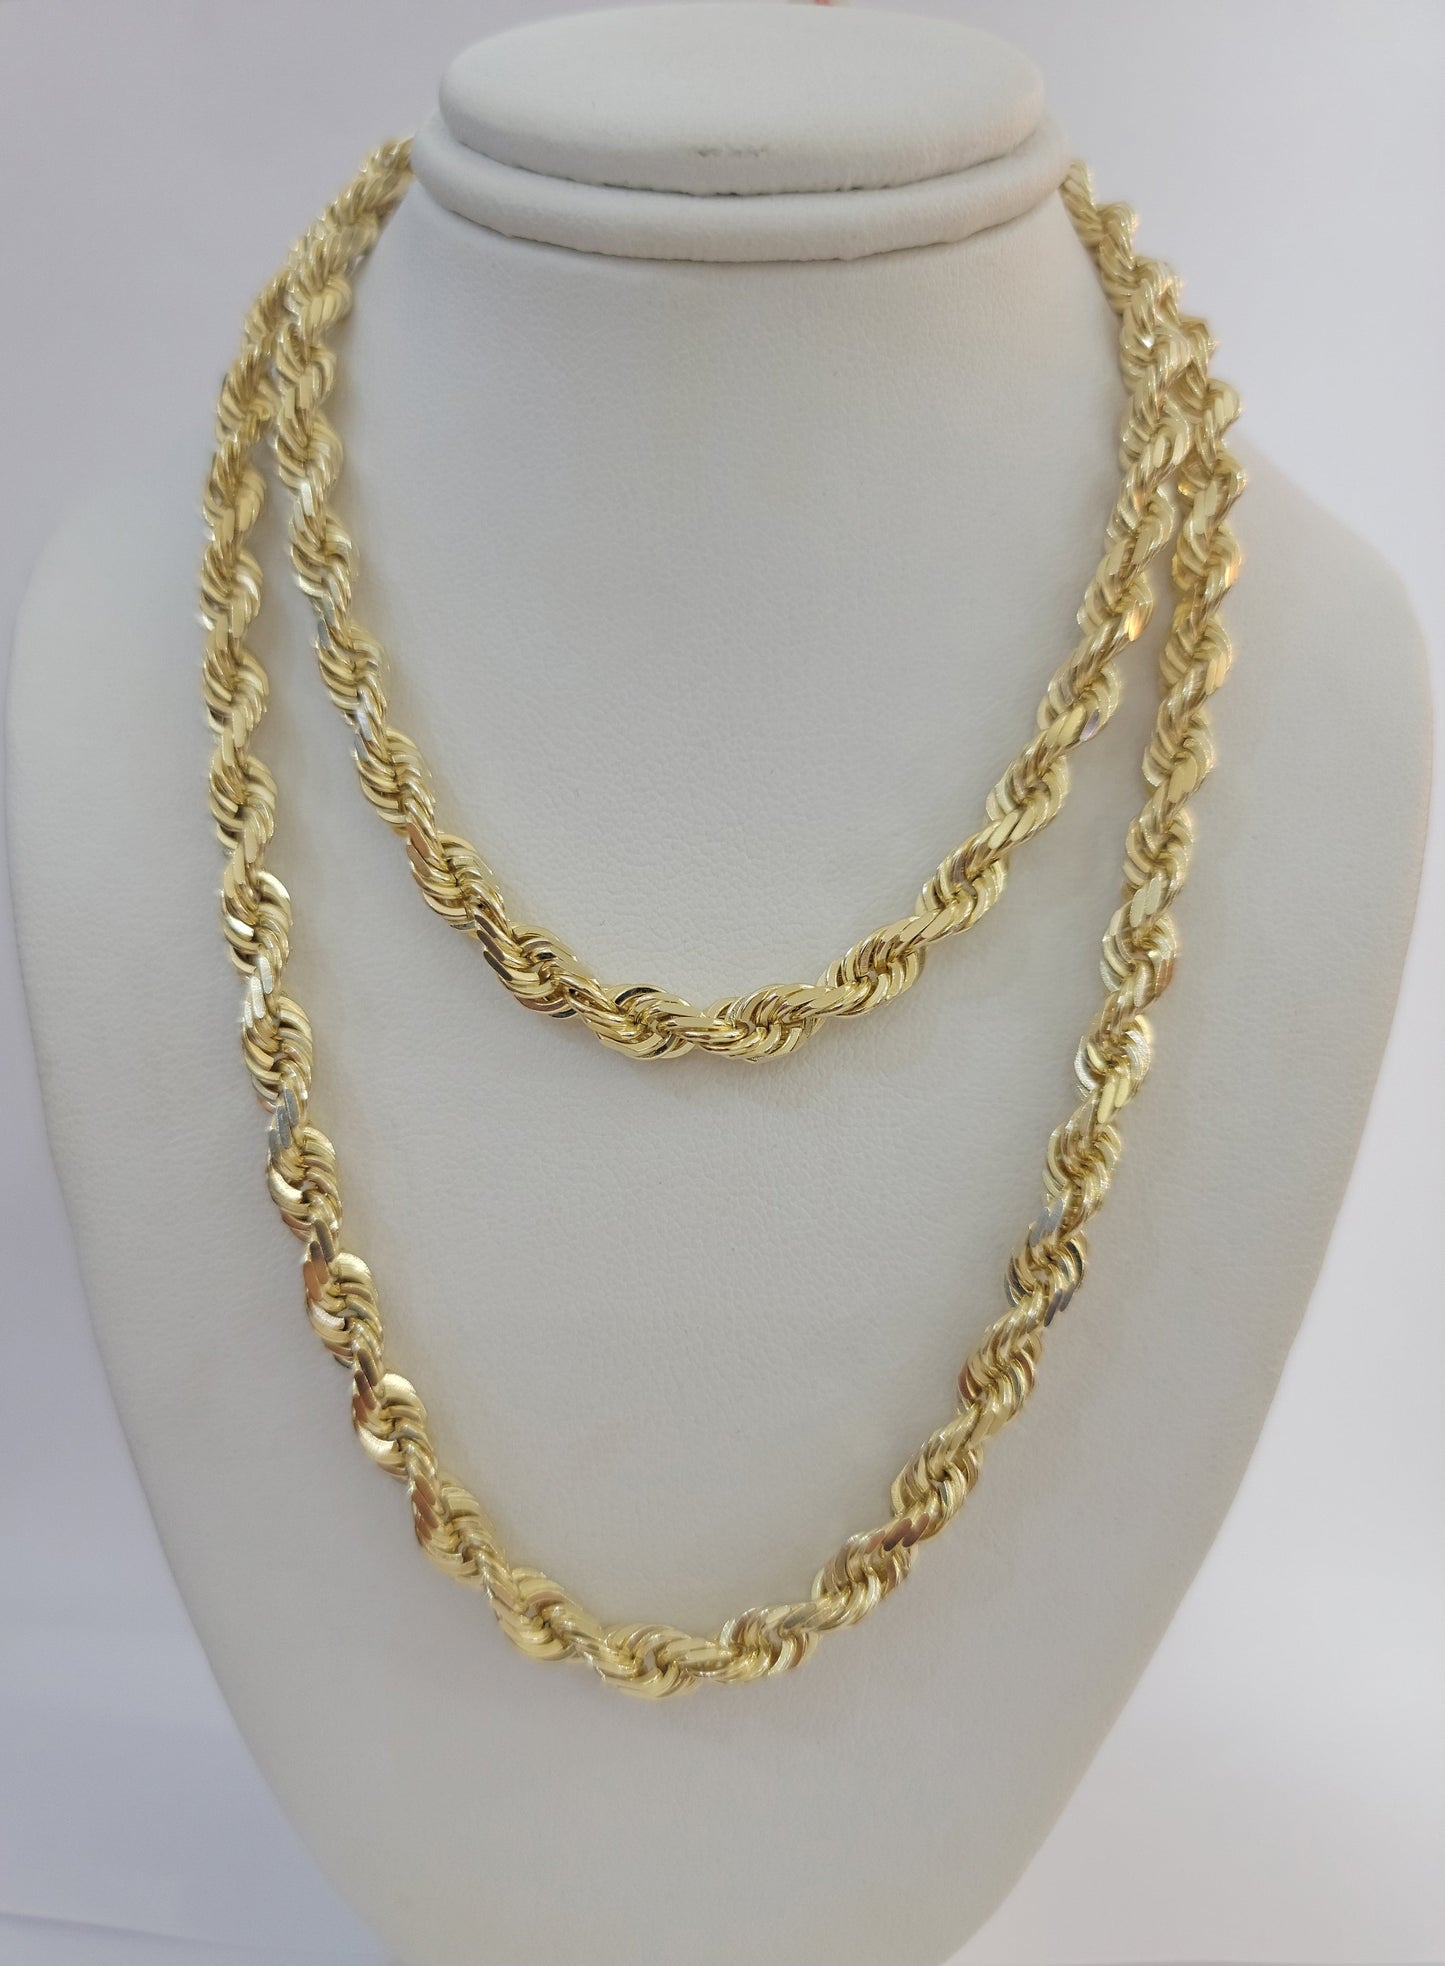 10k Yellow Gold Rope Chain Solid Necklace 6mm 22" Inch Real 10kt For Men Women